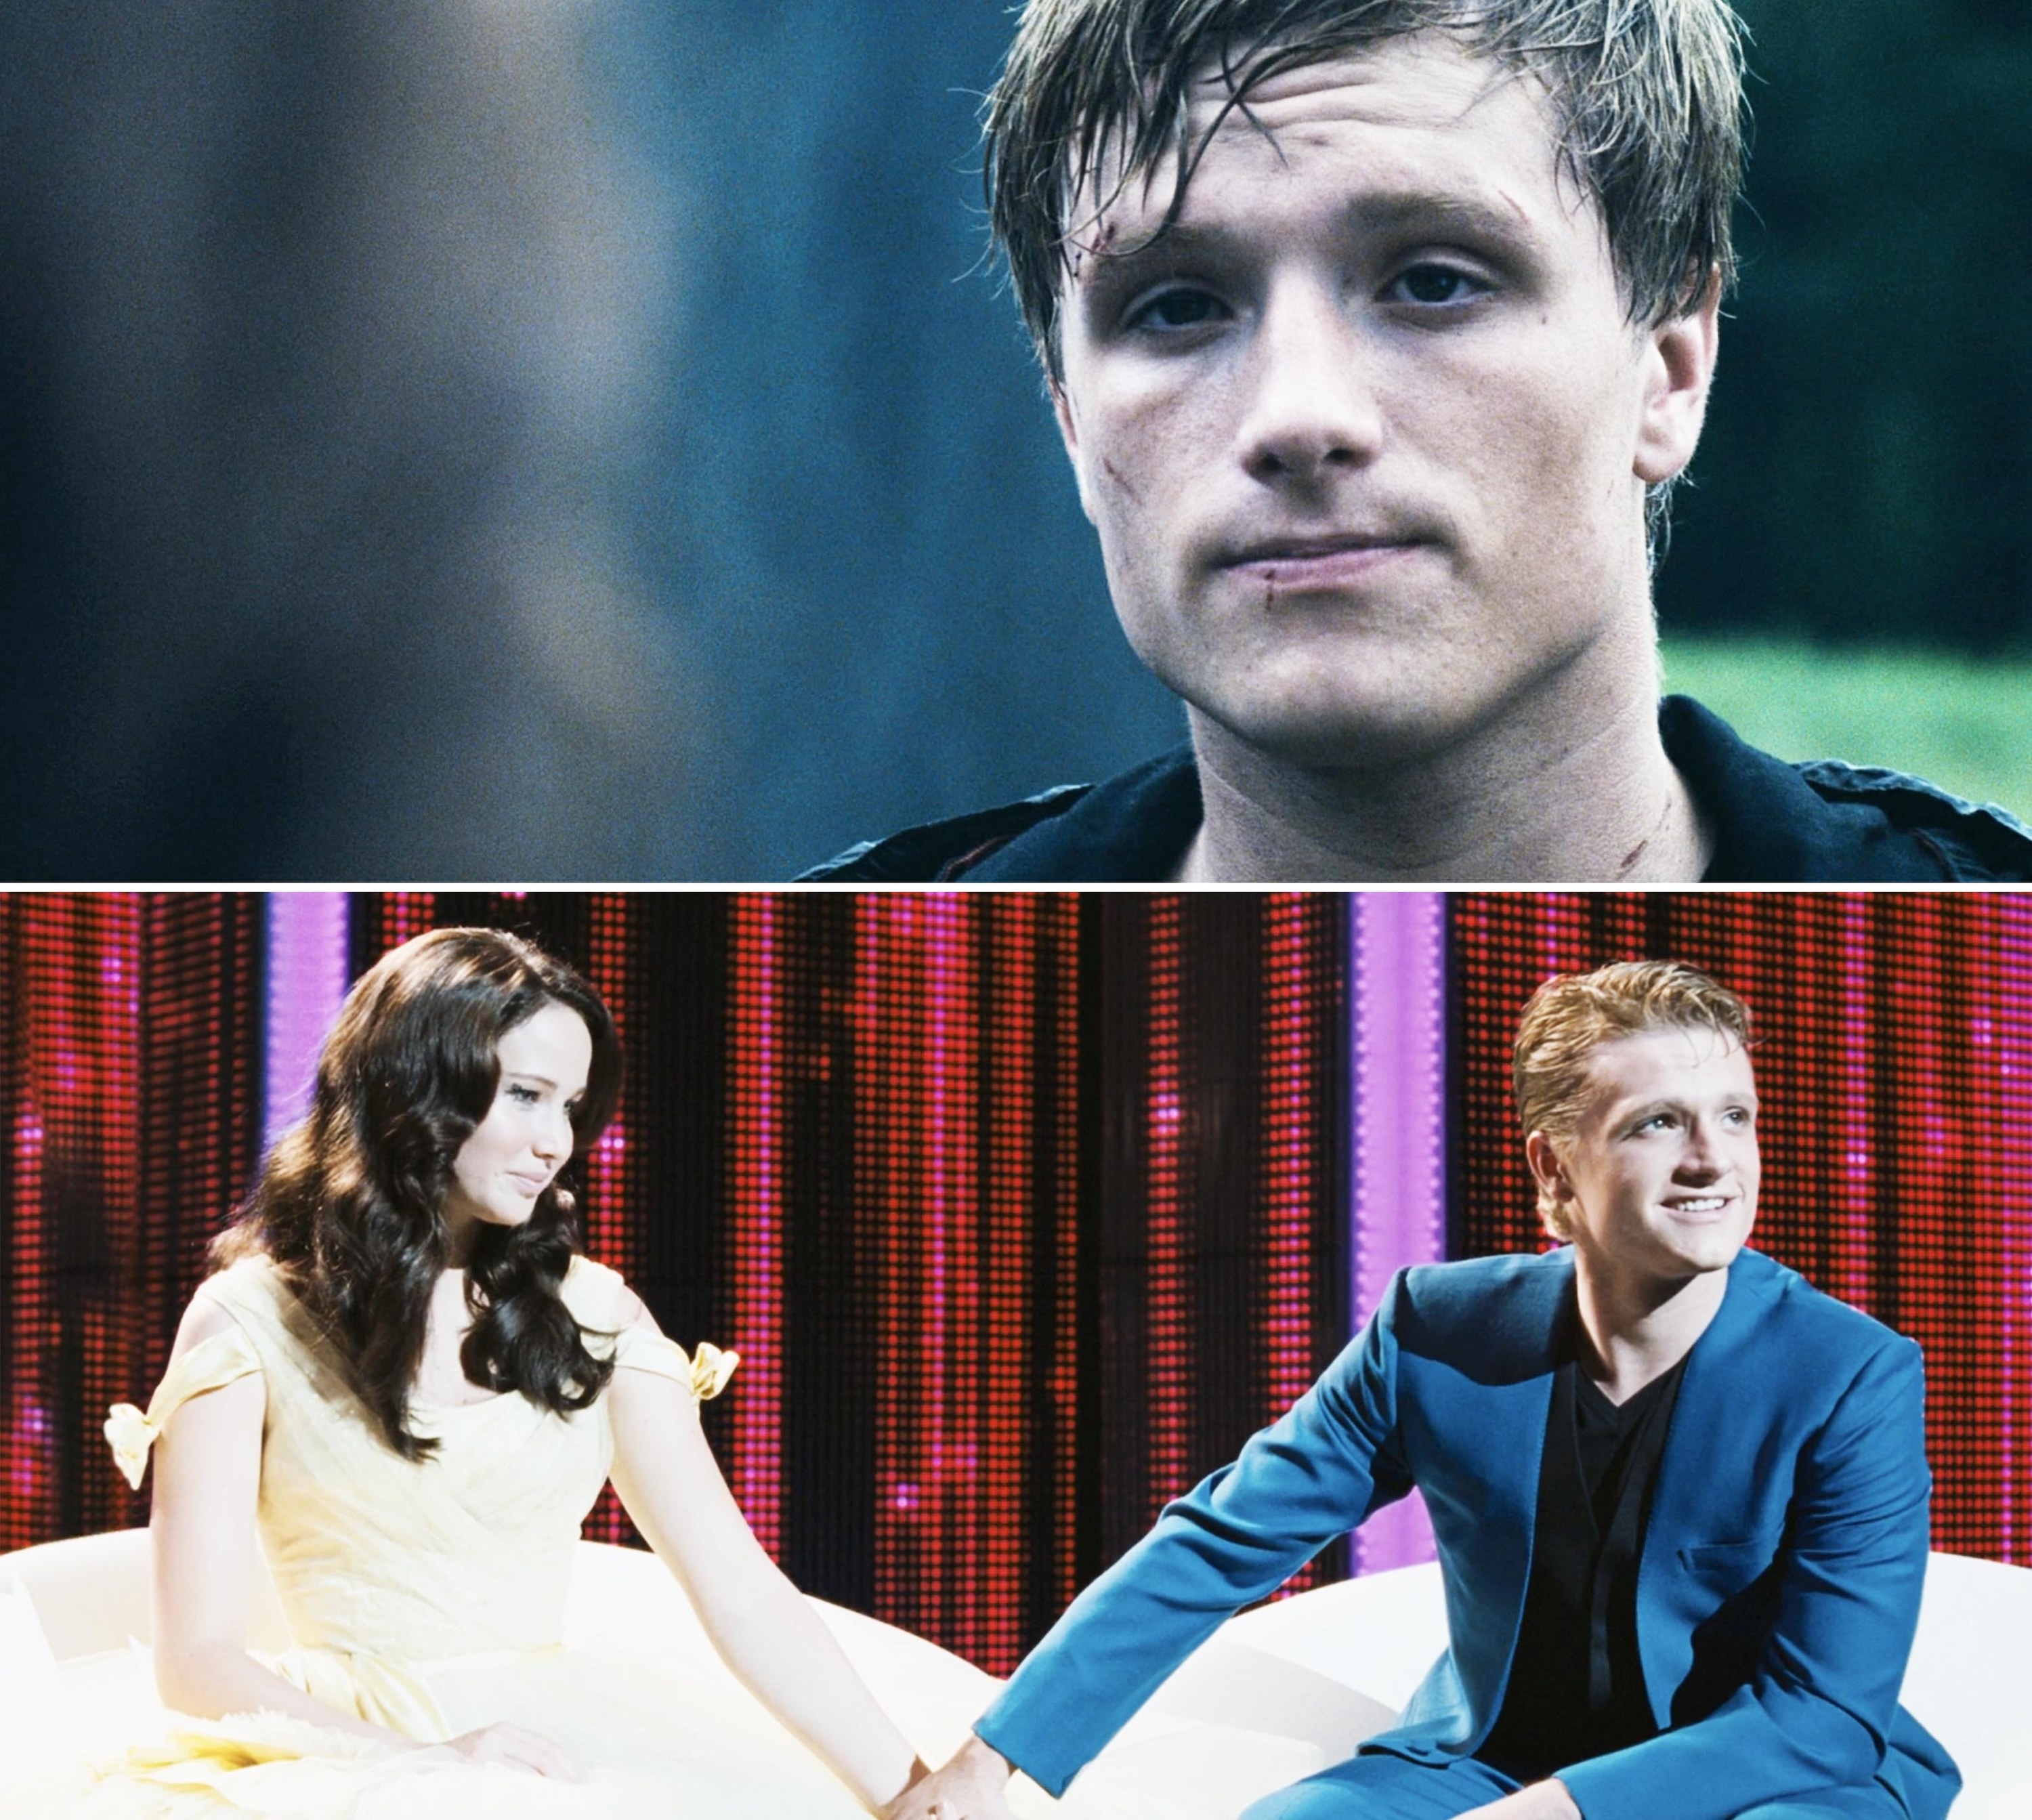 Why 'The Hunger Games' Vanished From The Pop Culture Conversation